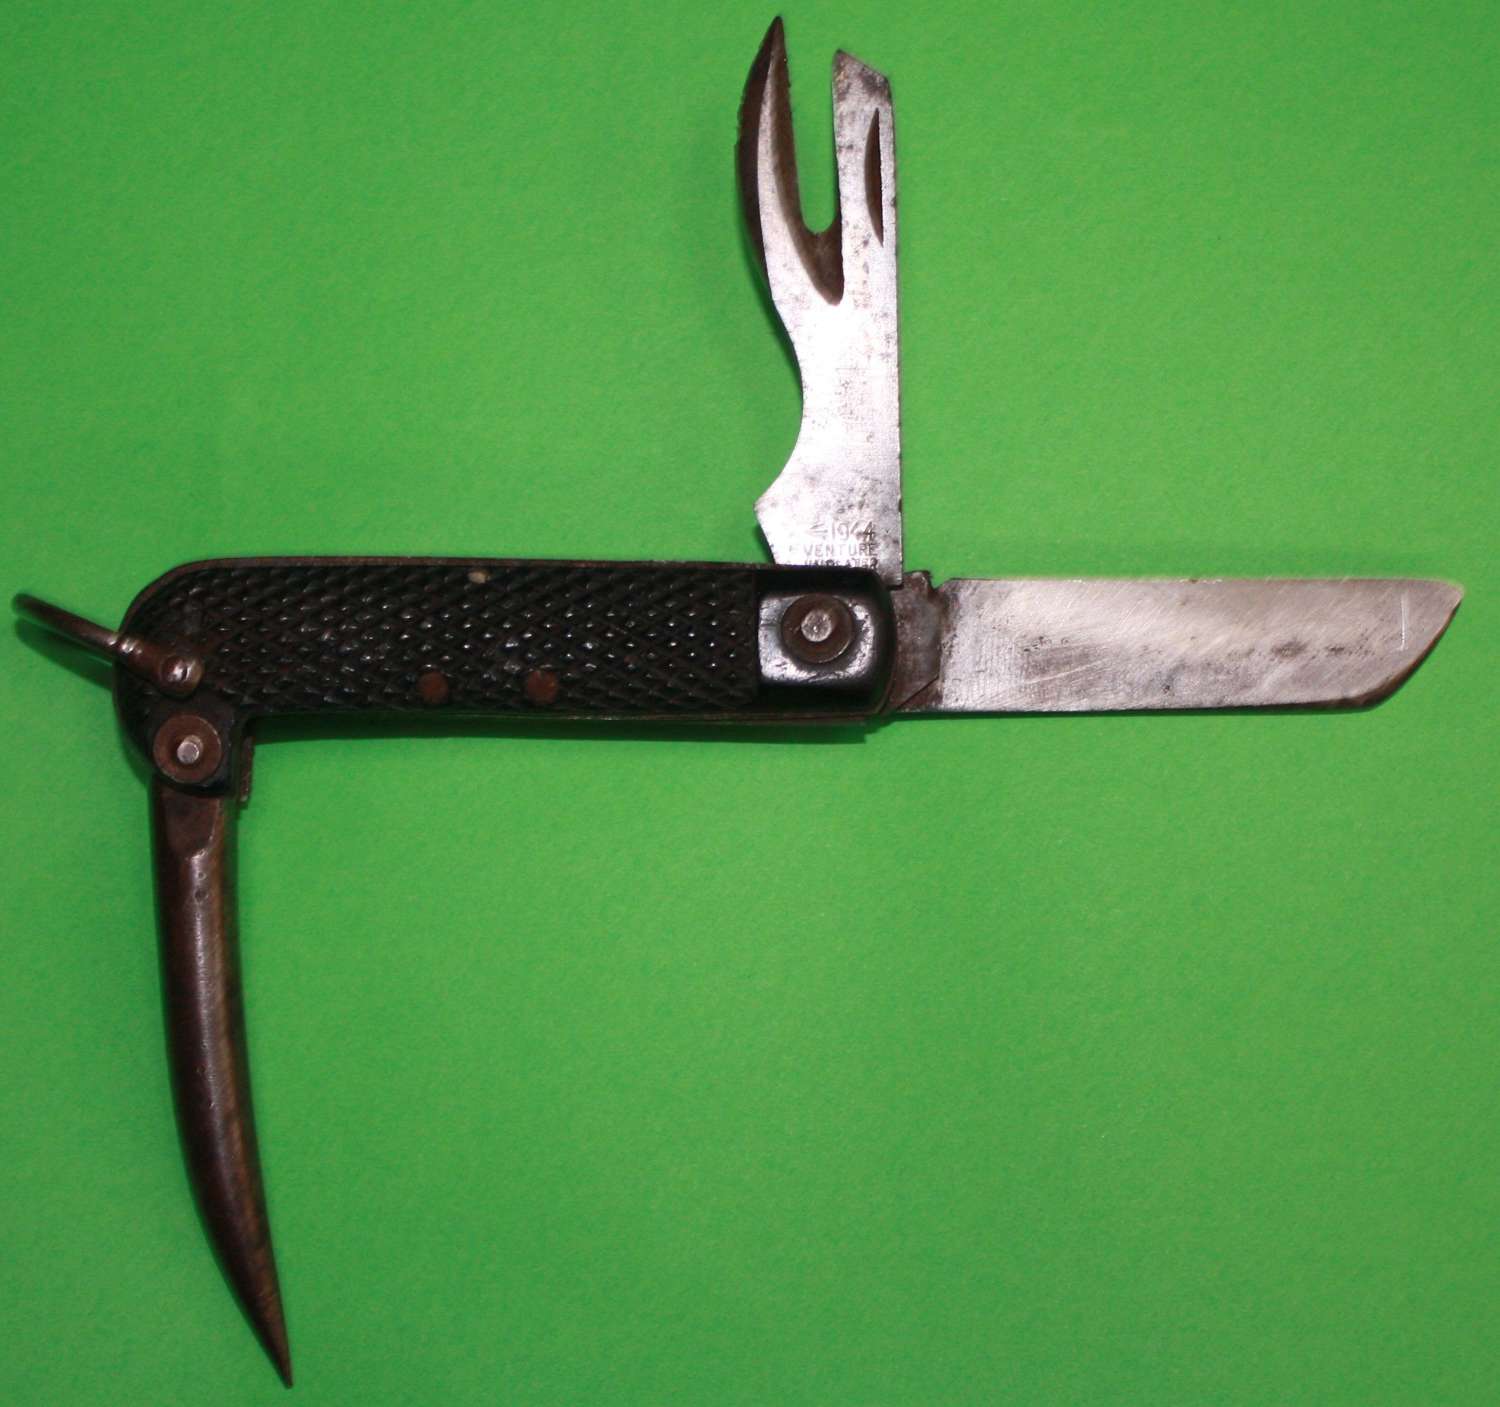 A GOOD EXAMPLE OF THE BRITISH ISSUE 1944 DATED CLASP KNIFE